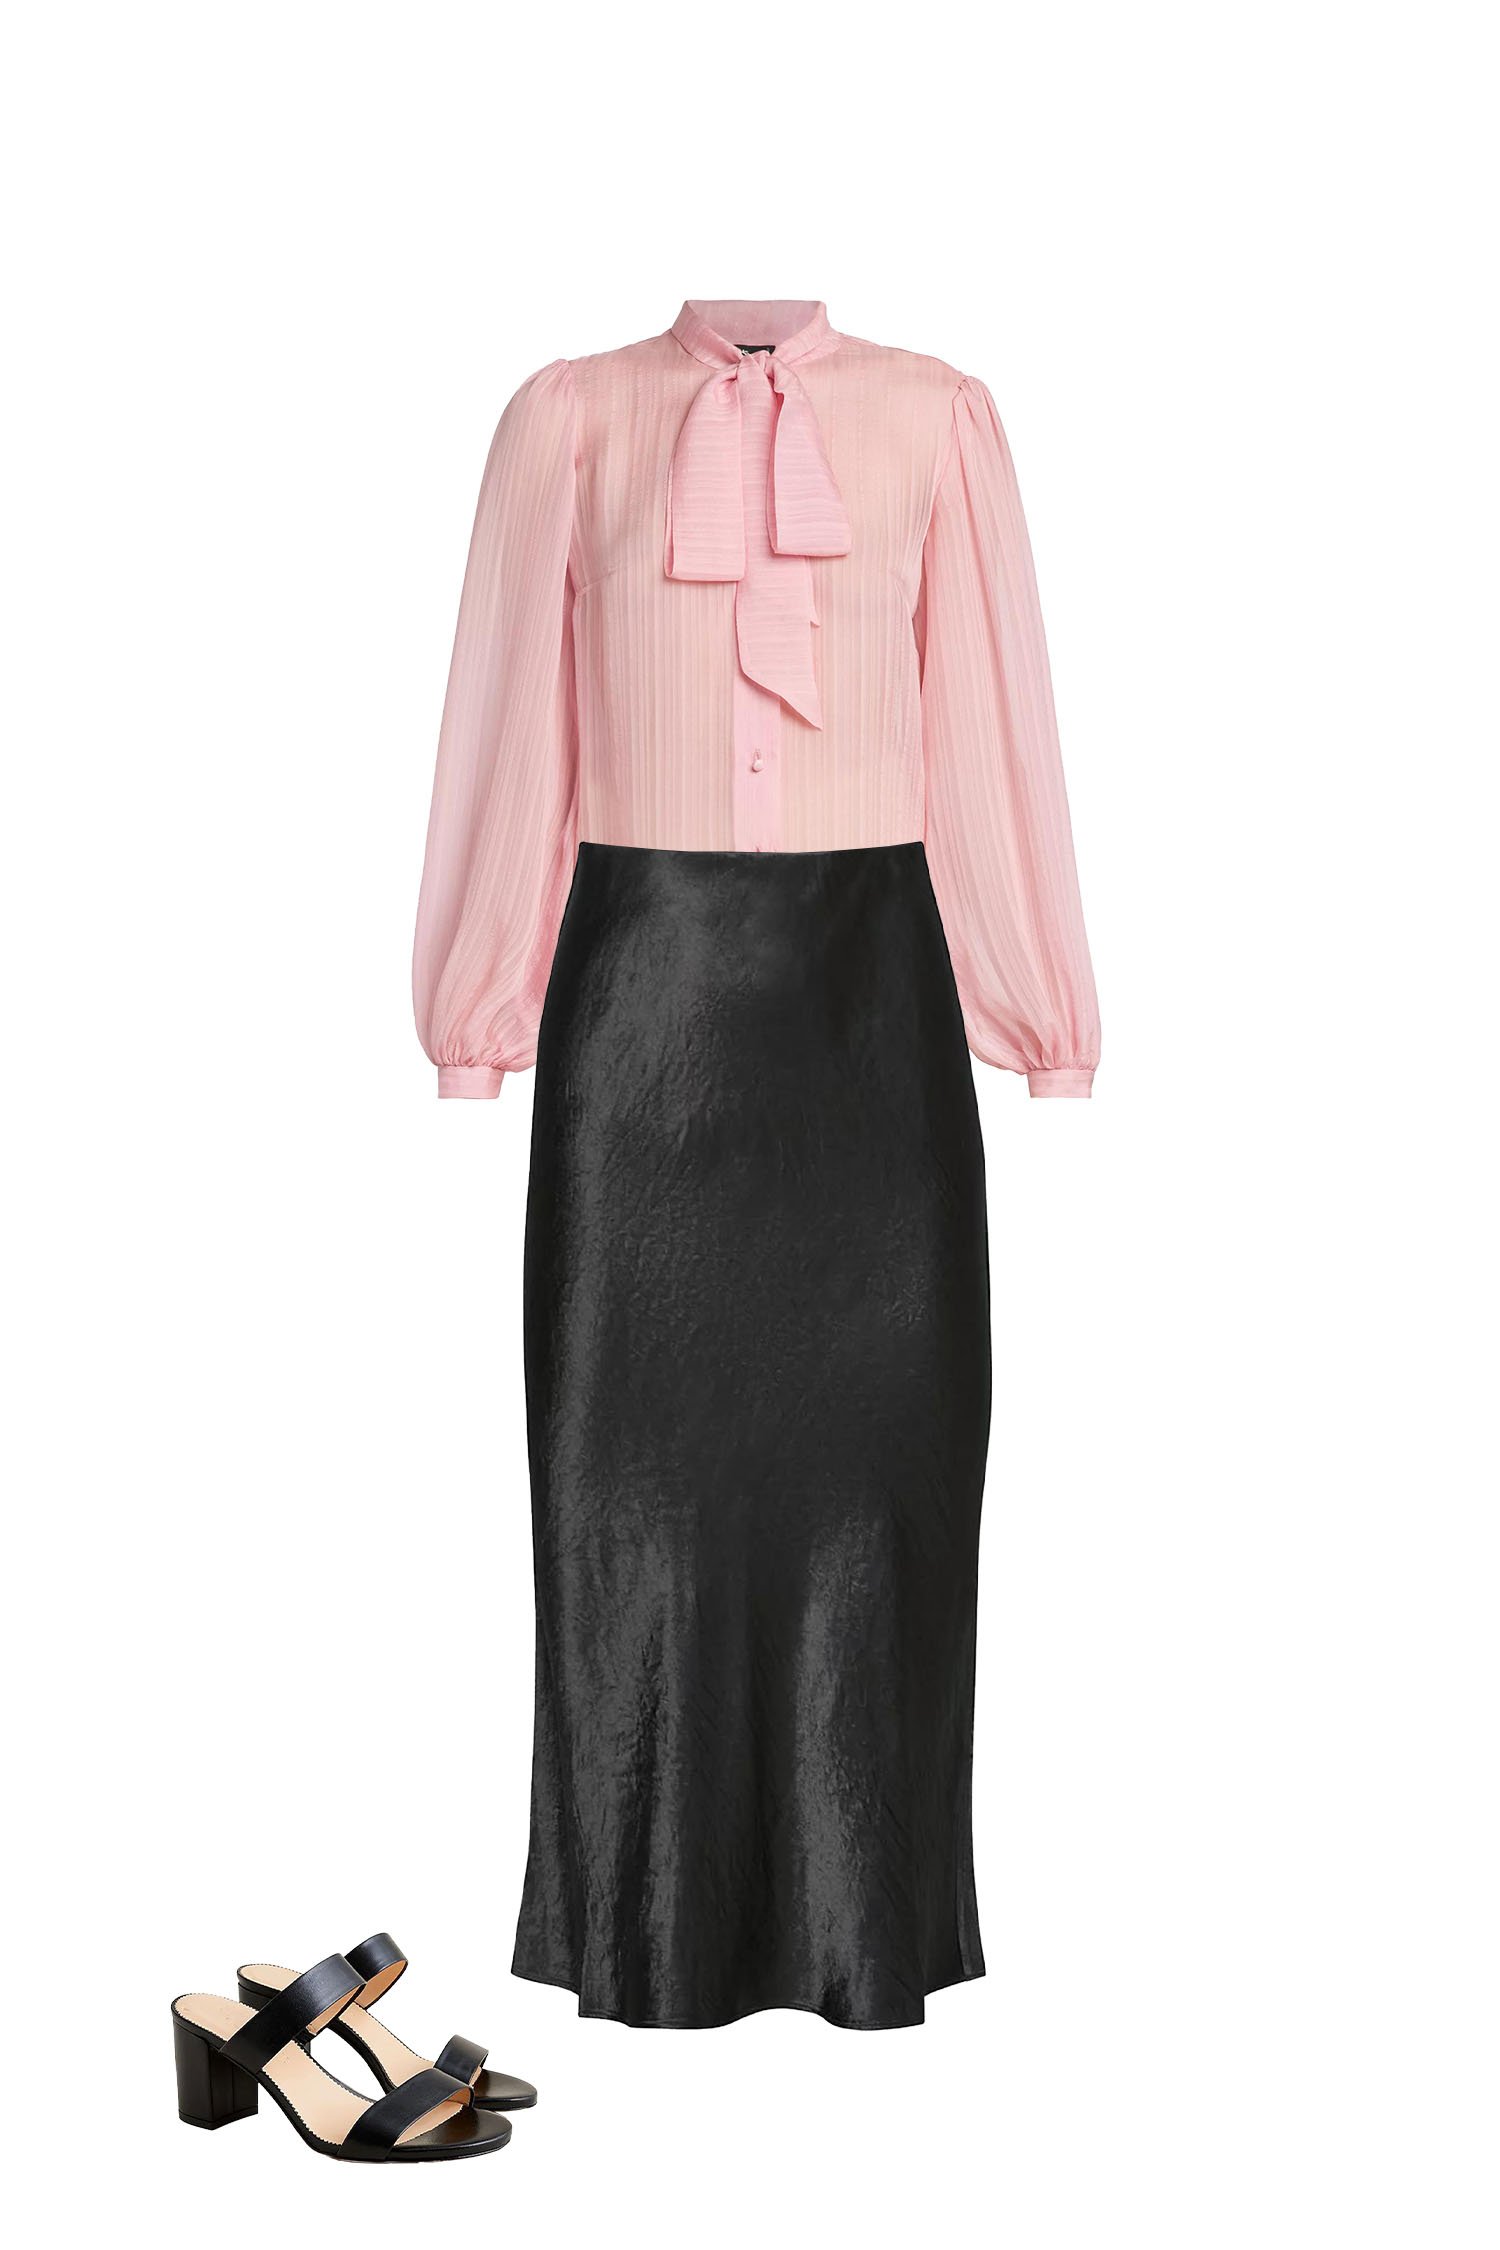 Black Satin Skirt Outfit with Pink Pussy Bow Blouse and Black Heeled Sandals